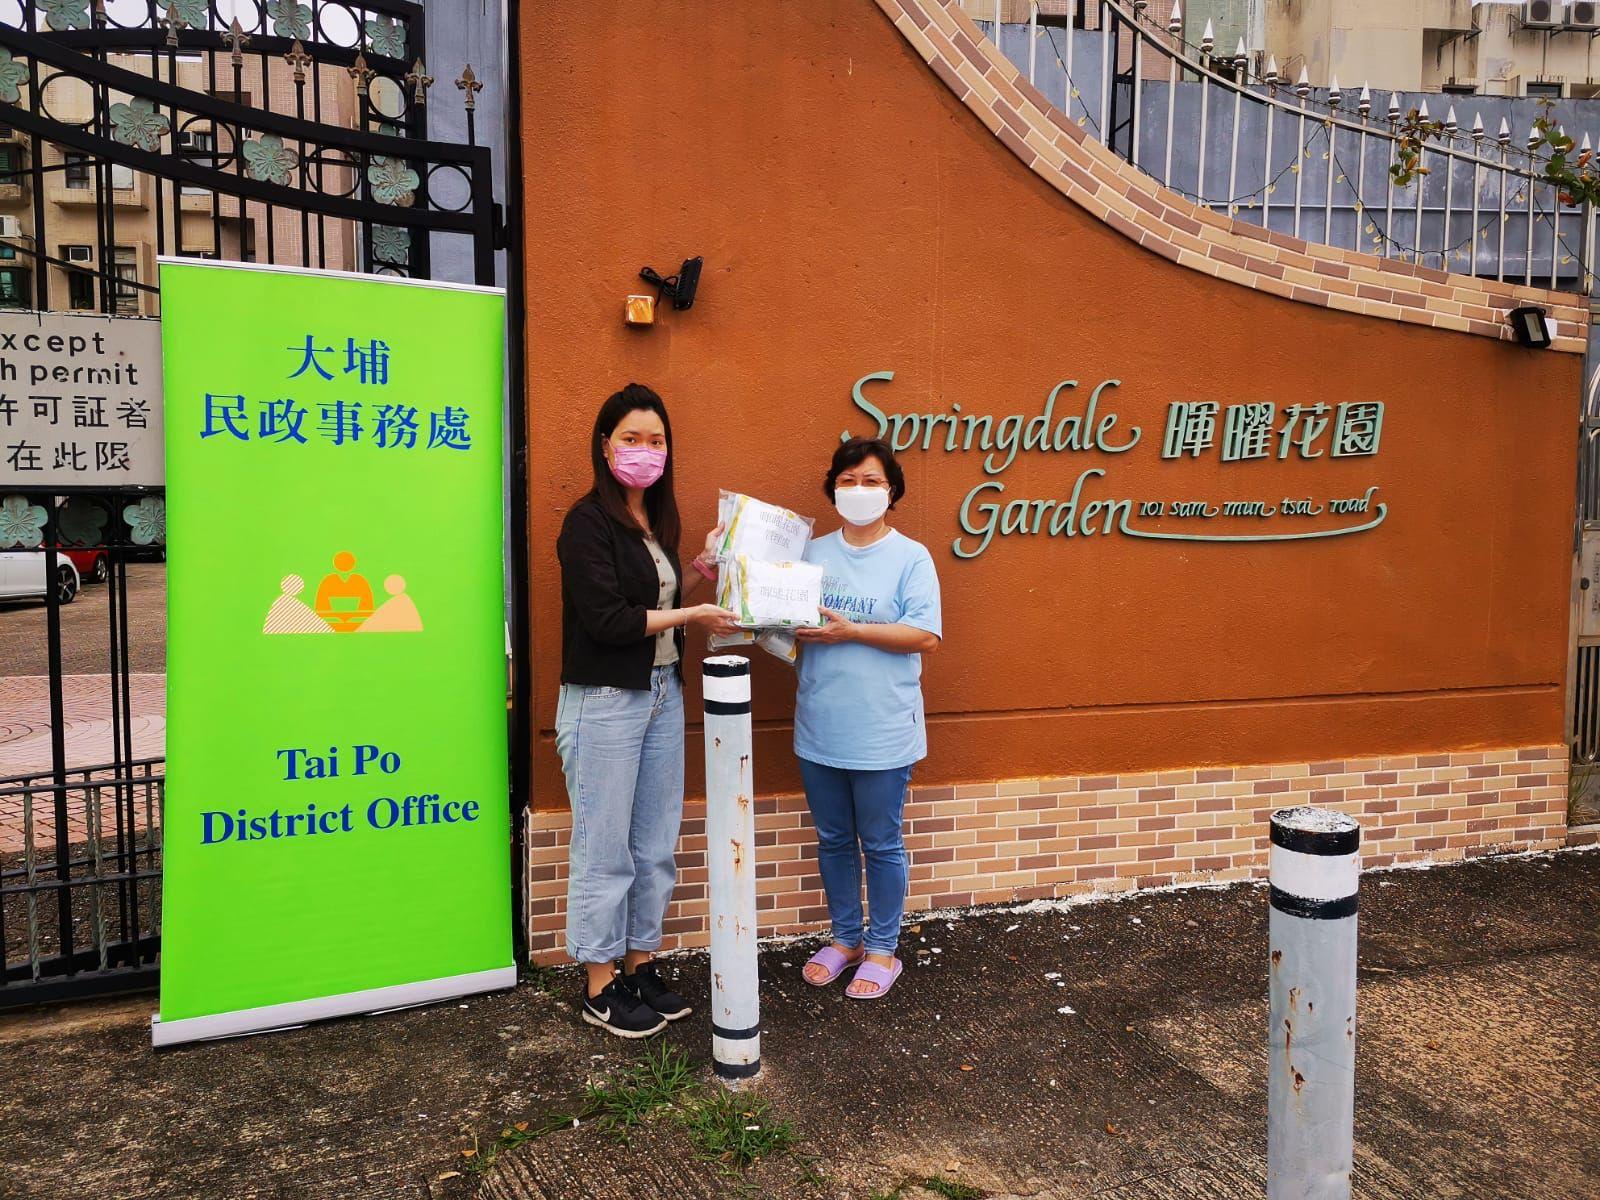 The Tai Po District Office today (March 27) distributed COVID-19 rapid test kits to households, cleansing workers and property management staff living and working in Springdale Garden for voluntary testing through the property management company.
